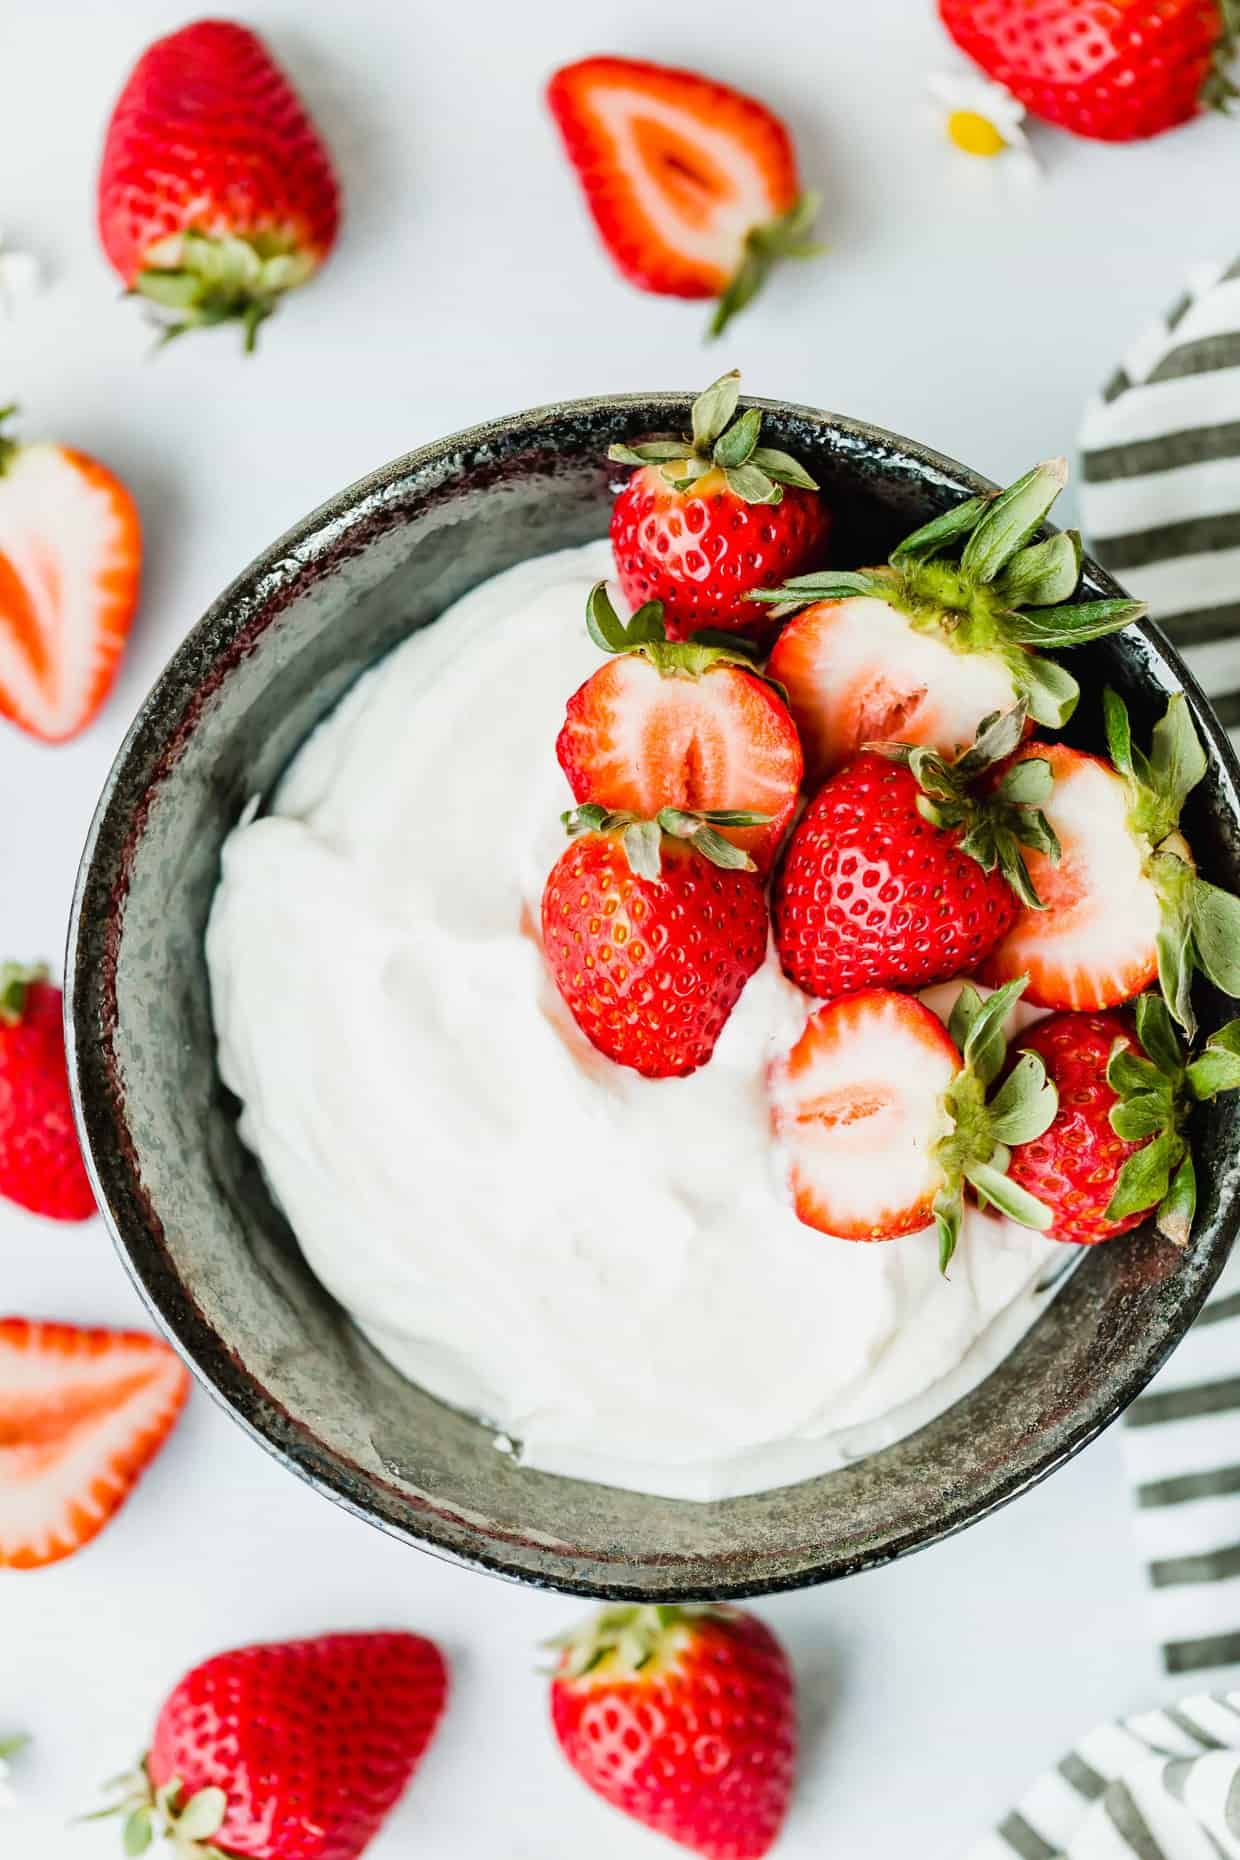 This Greek Yogurt Whipped Cream is beyond refreshing! Add strawberries, peaches, or the fruit of your choice and you have an easy and delicious dessert!